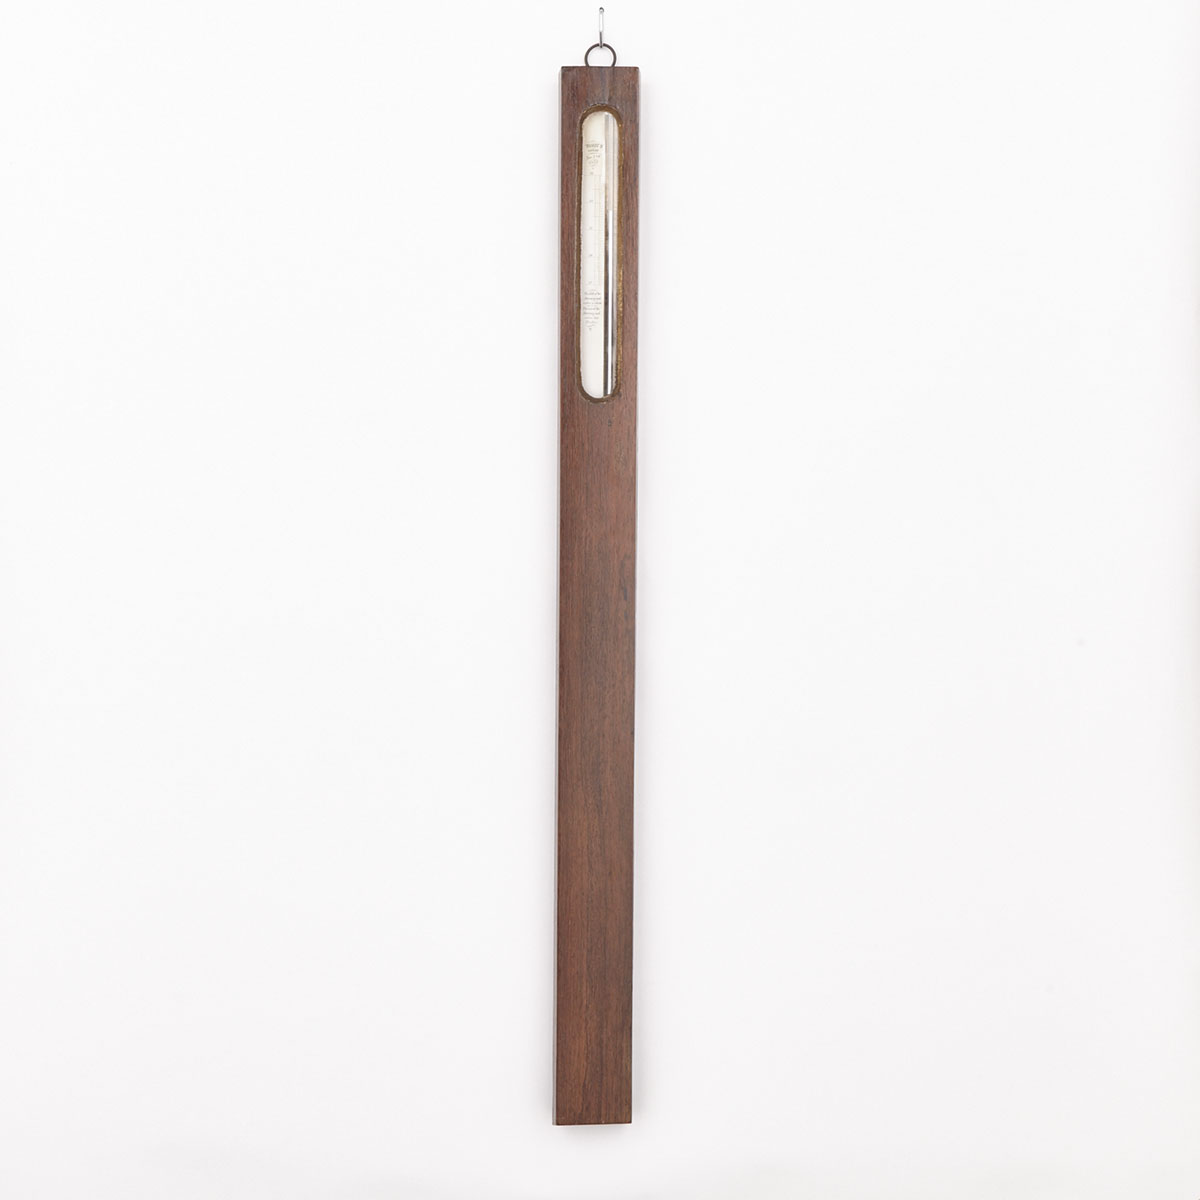 American Rosewood Stick Barometer, TImby’s Patent, Nov. 3rd 1857